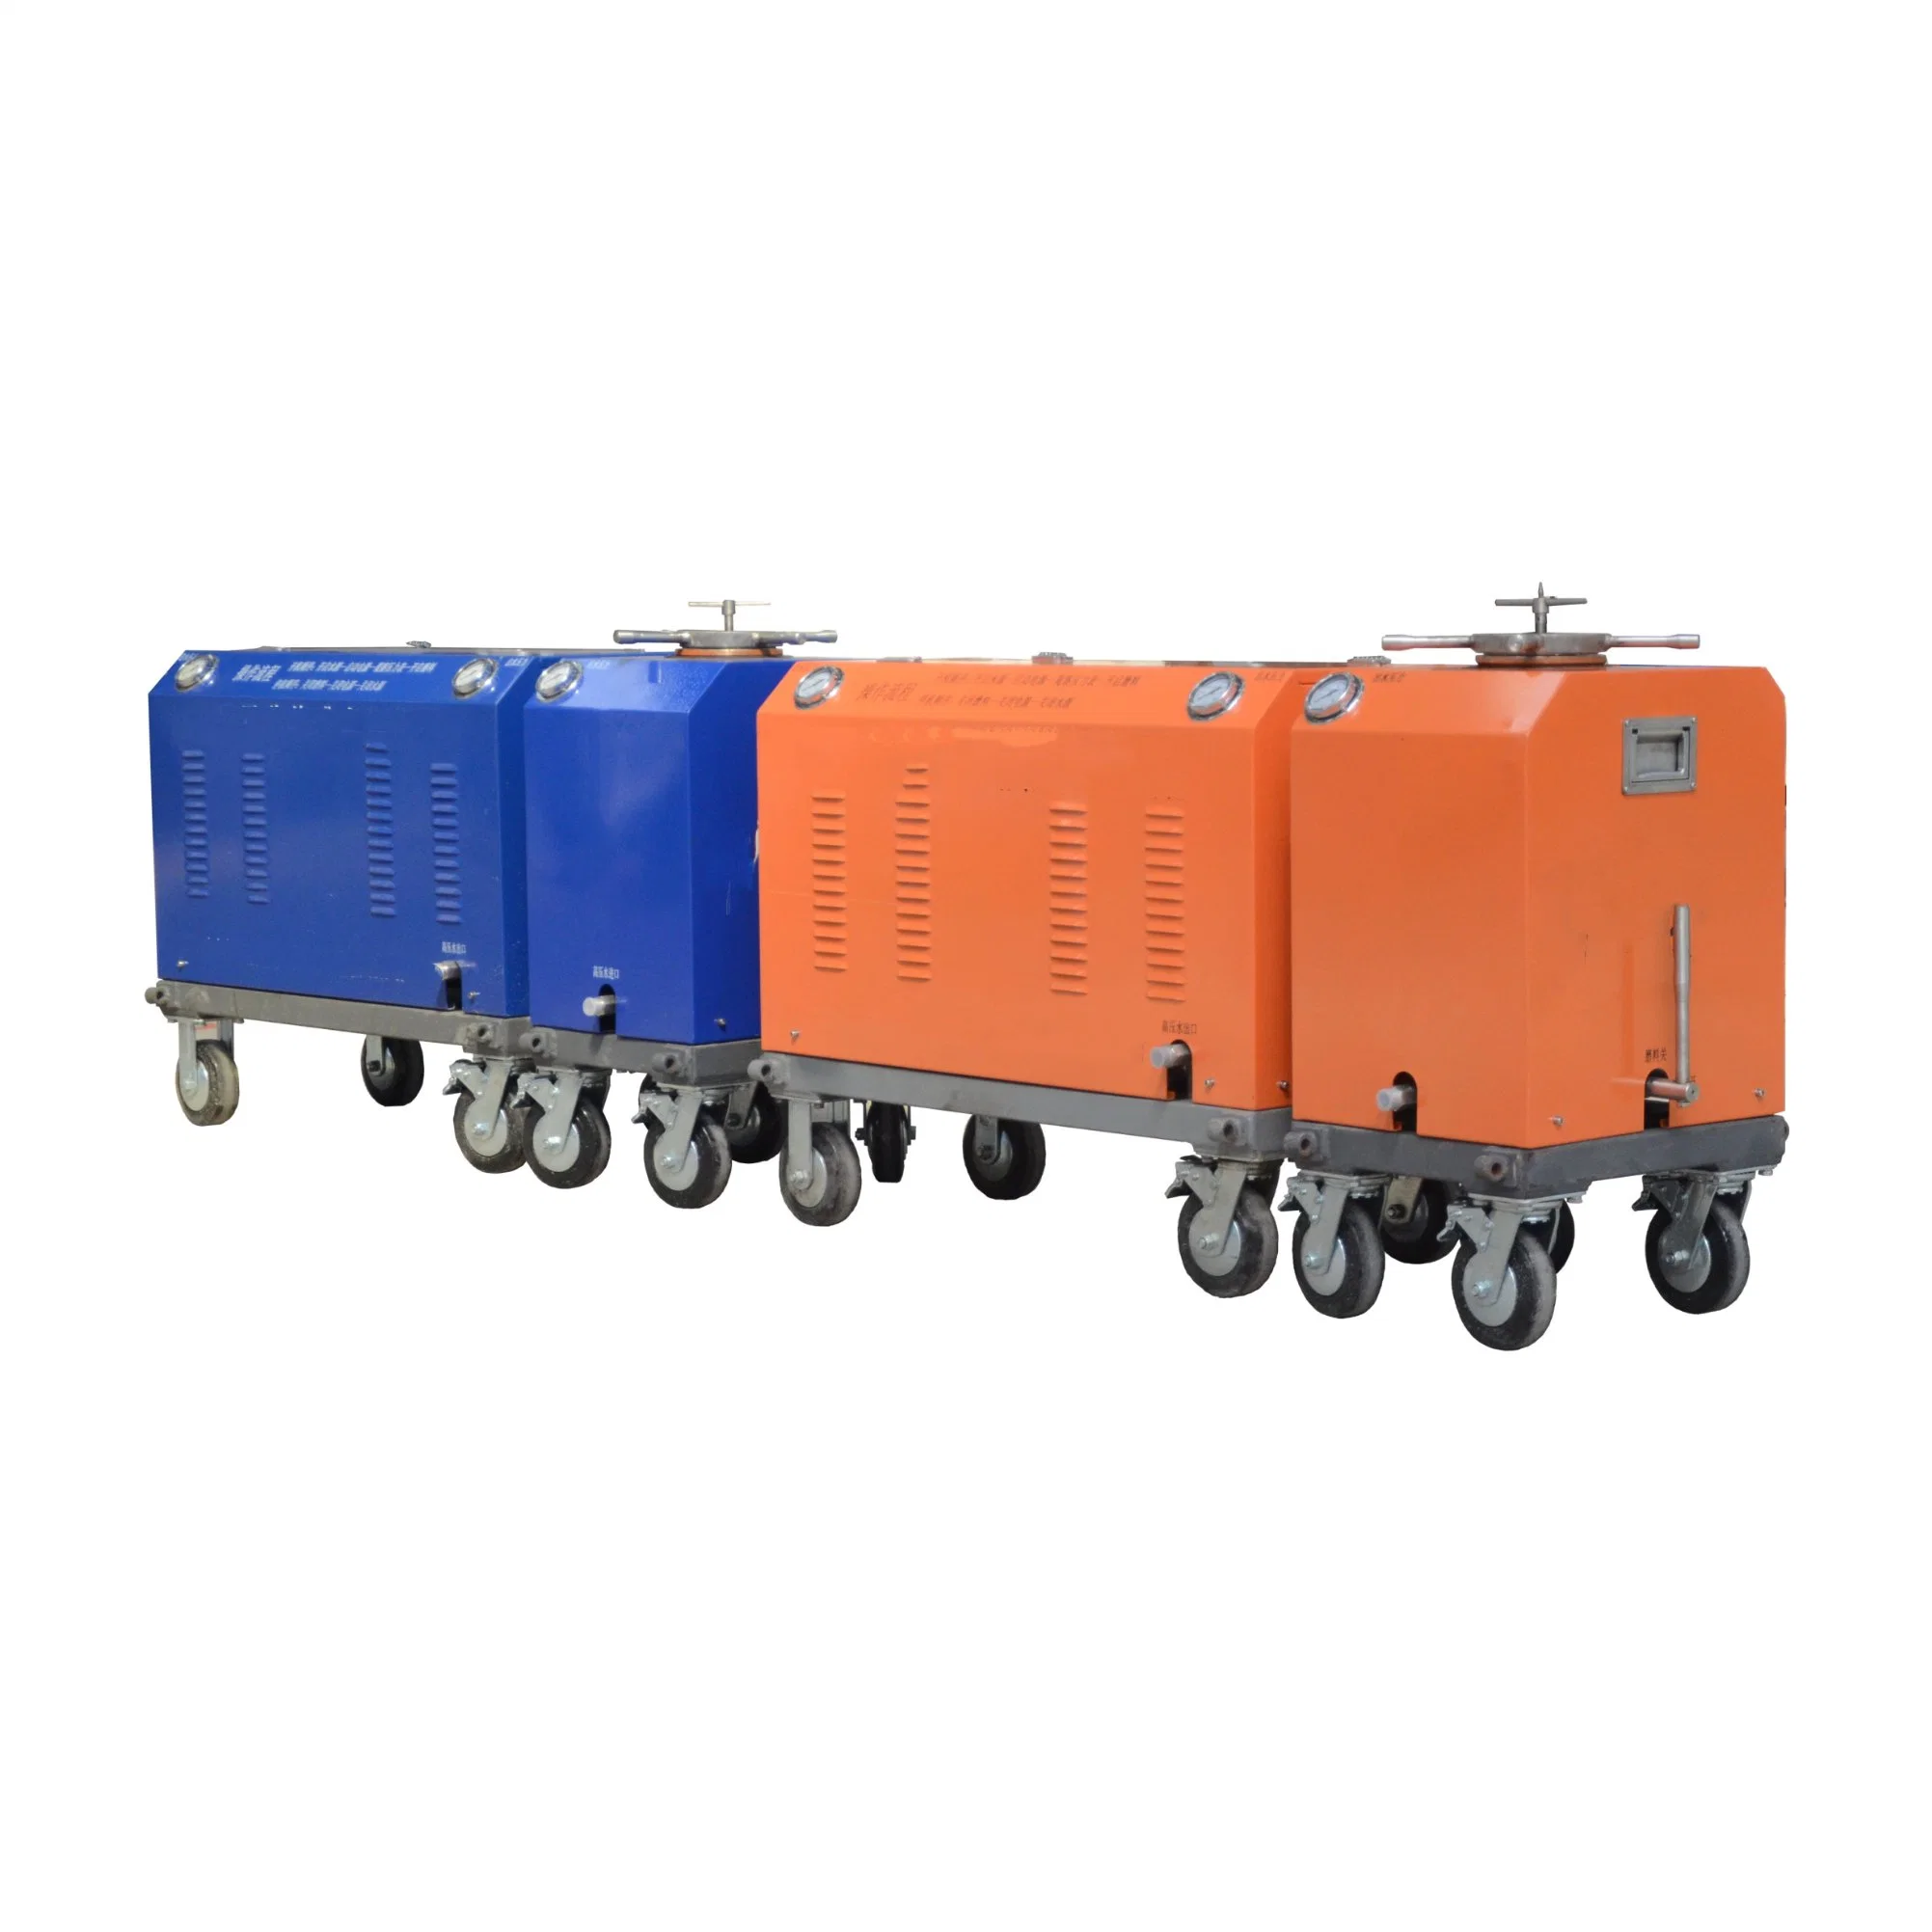 Portable Water Jetting Machine, Water Jet Cutter, Water Jet Cutting Supplier in China